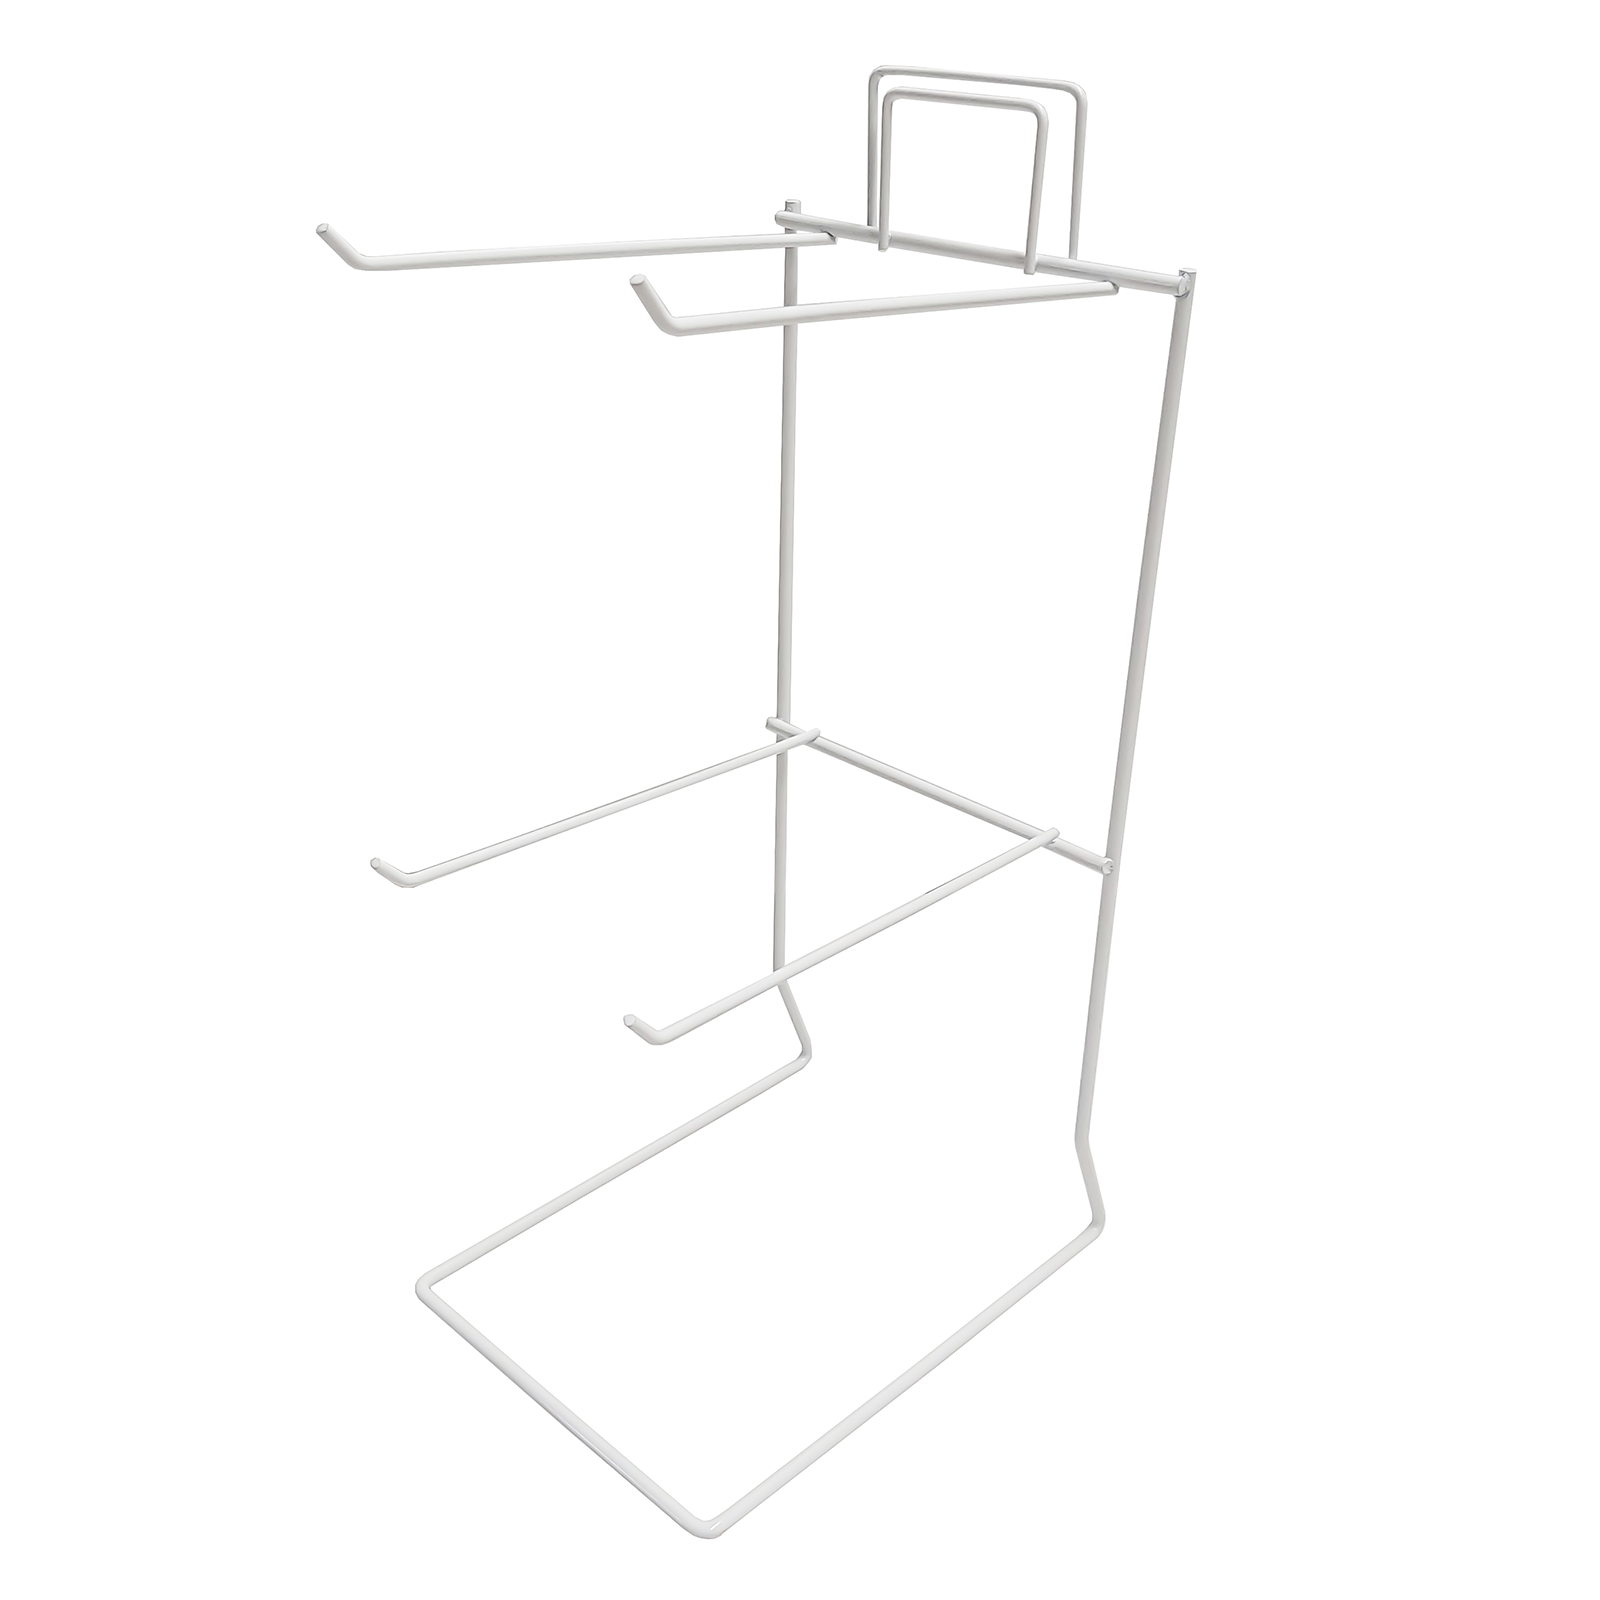 J48 4 Hook stand